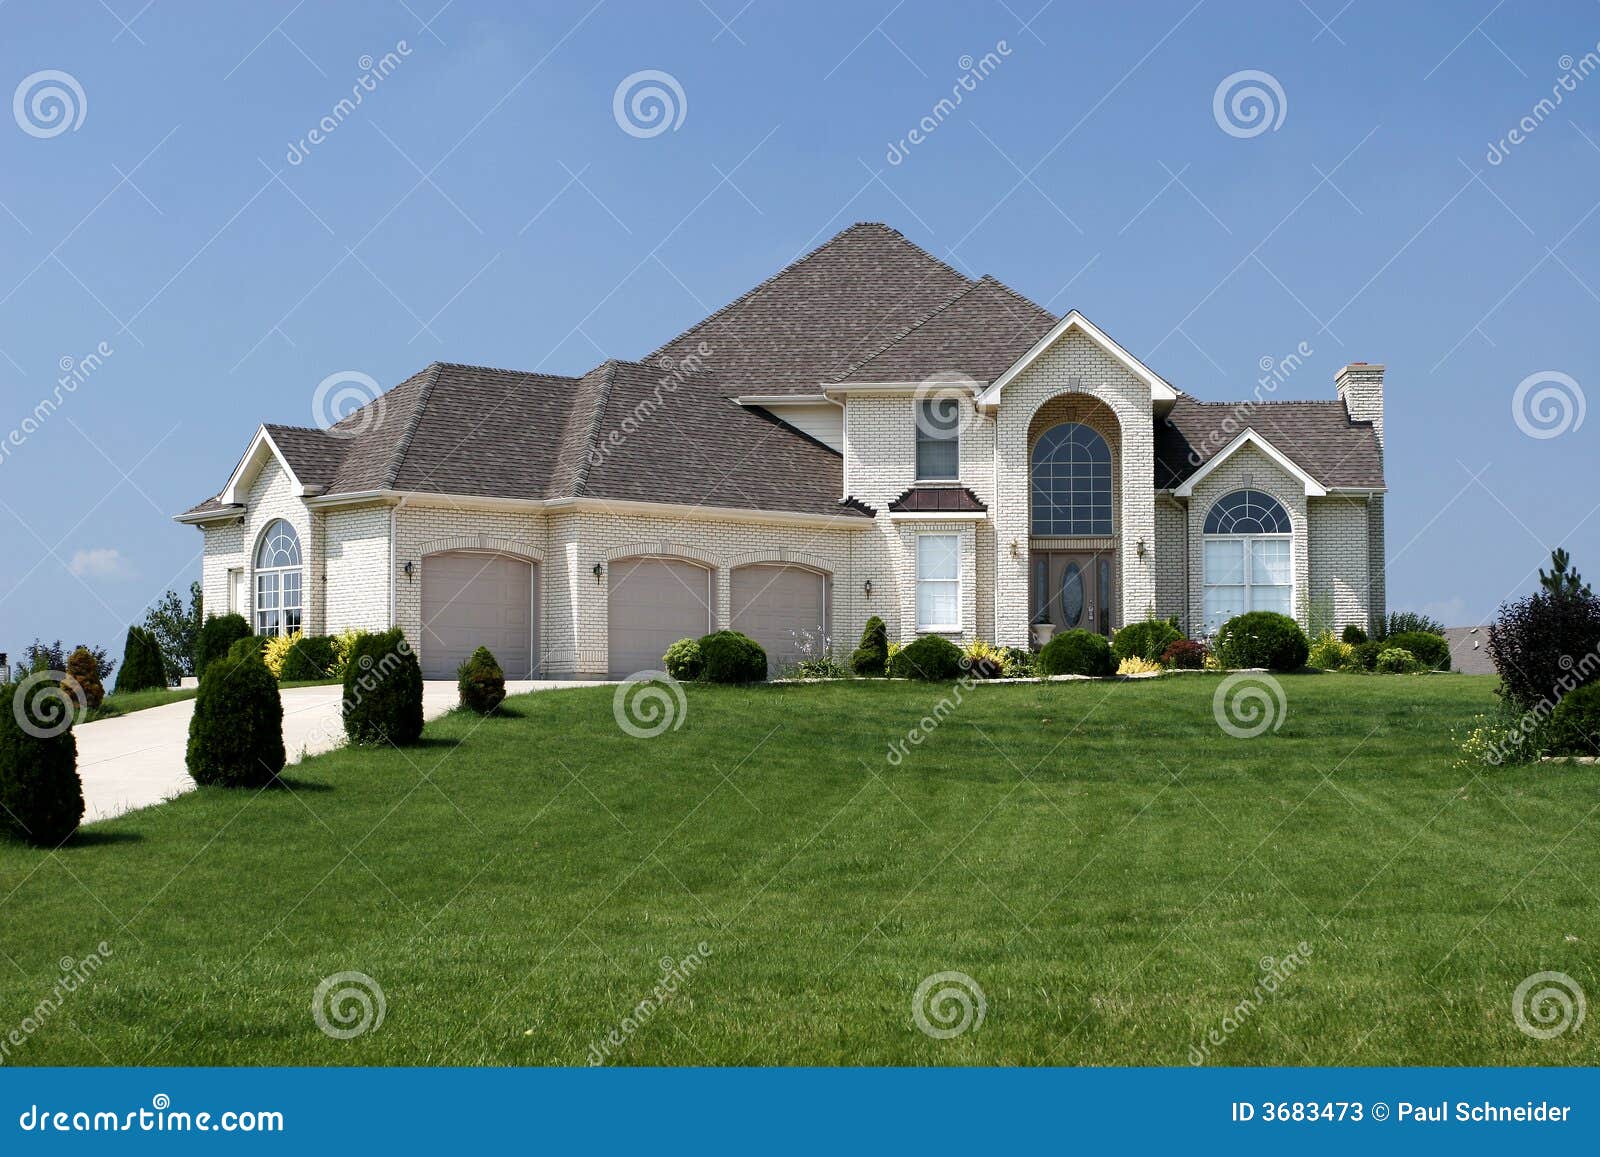 house home residential subdivision family